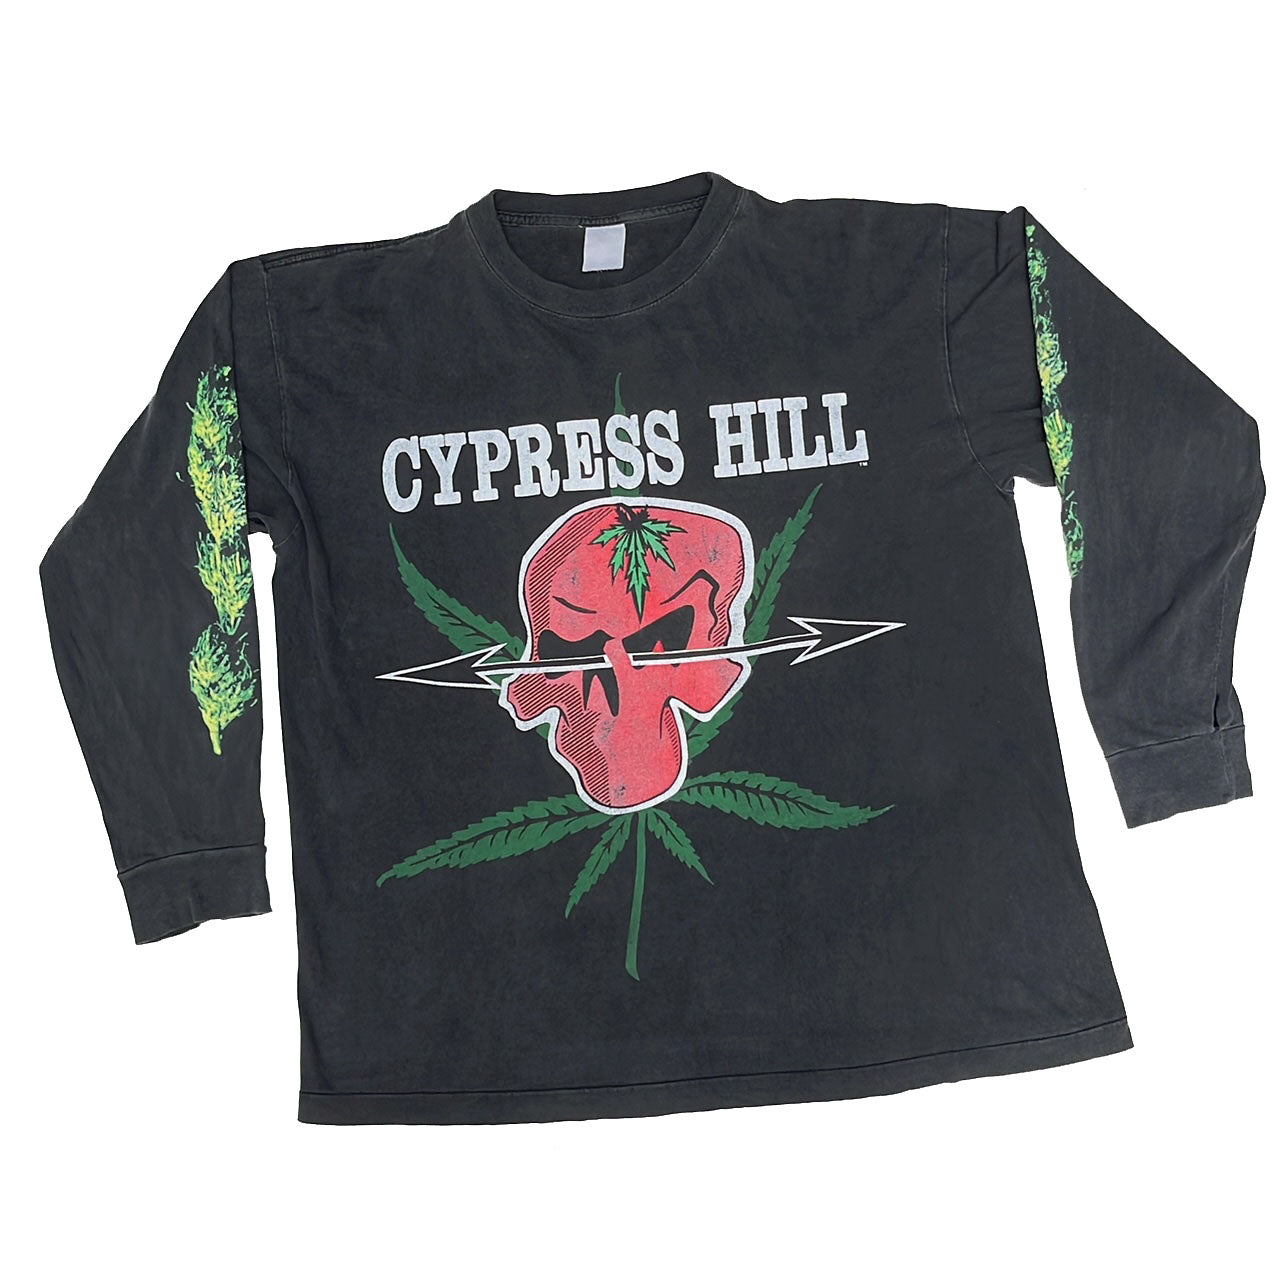 CYPRESS HILL 91 L/S T-SHIRT – Temple of Nostalgia